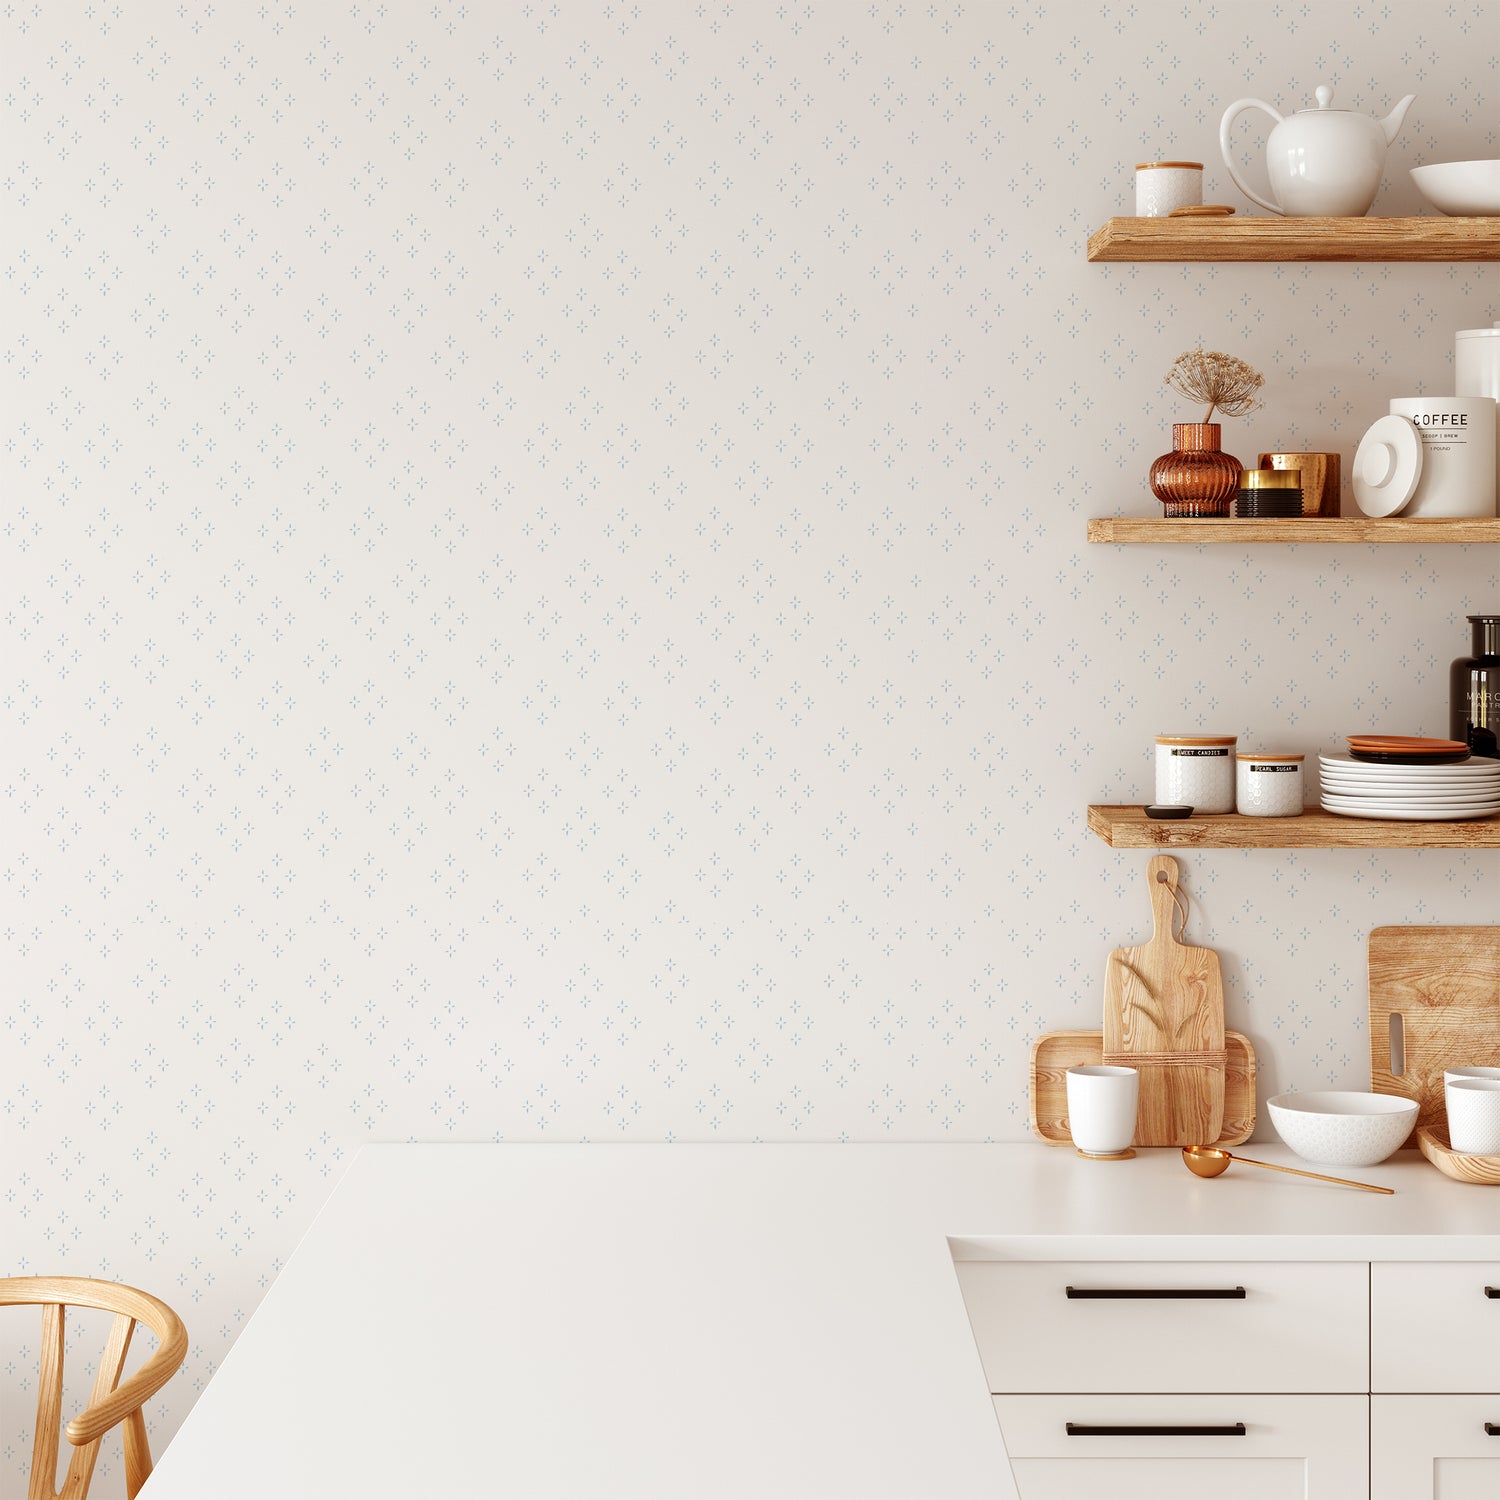 Kitchen wall featuring our diamond and star shaped Isla peel and stick wallpaper by Jackie O'Bosky. This classic pattern is made of blue dots on a creamy white background.